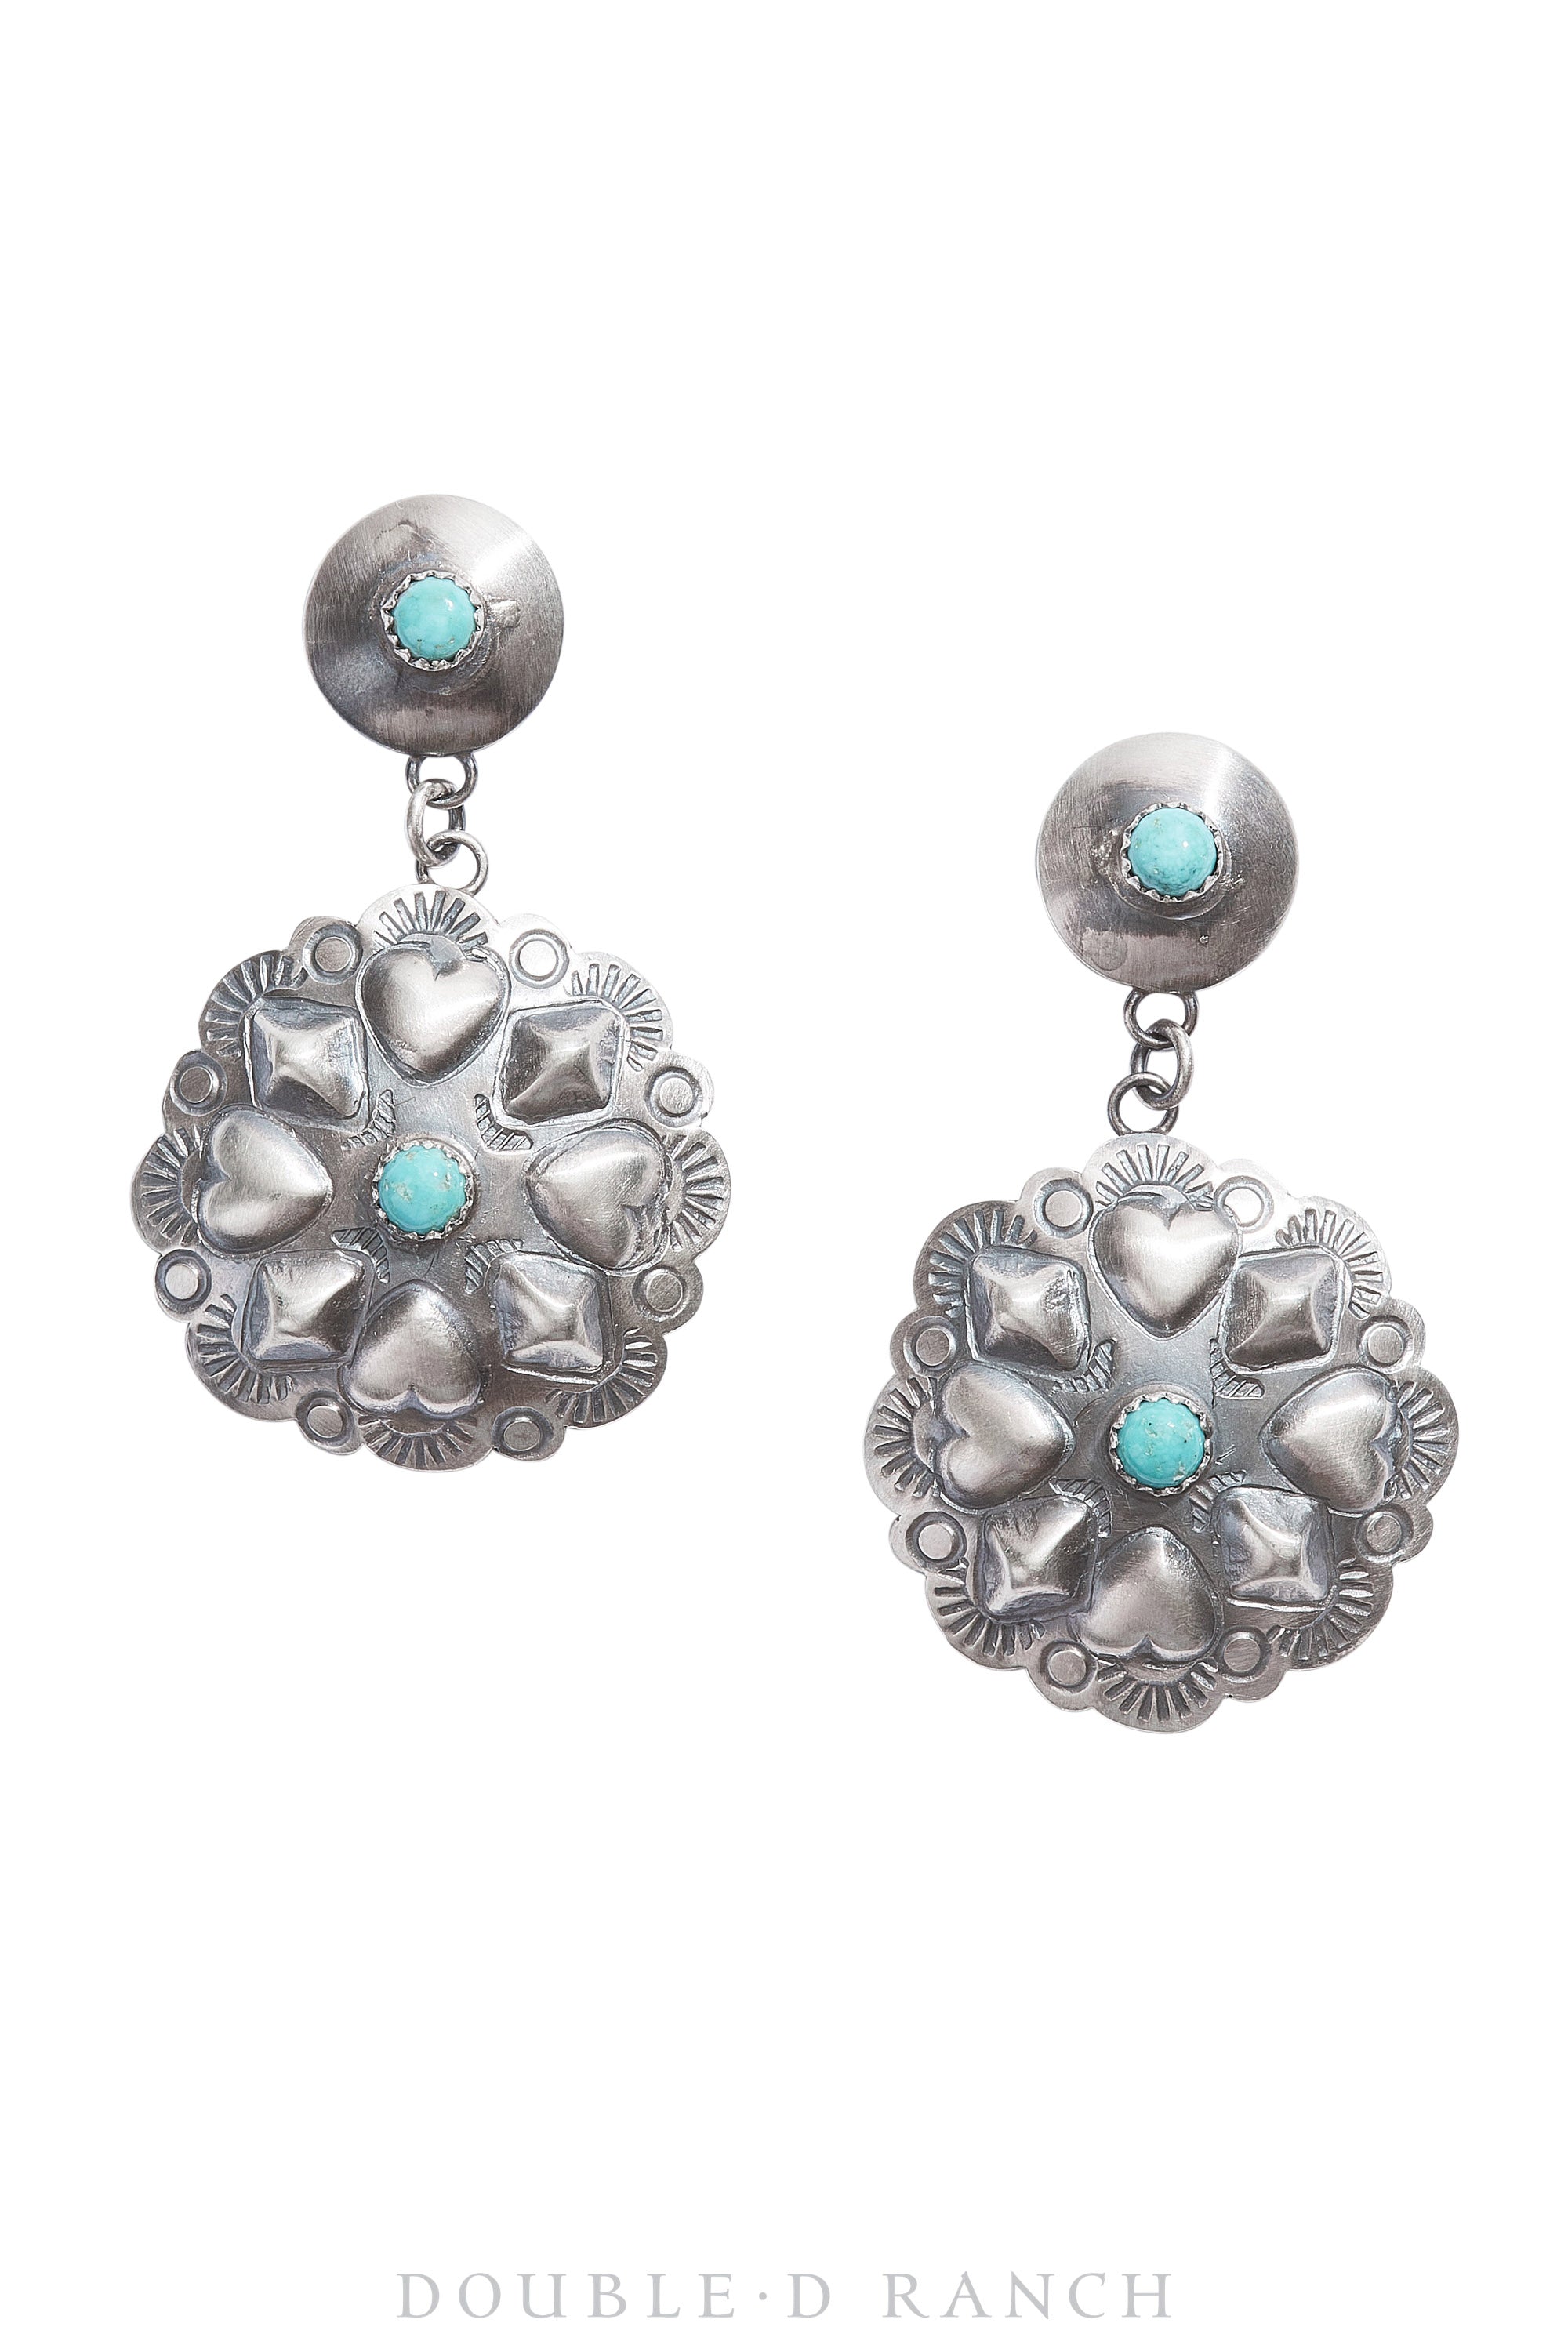 Earrings, Concho, Drop, Turquoise, Hallmark, Contemporary, 1127